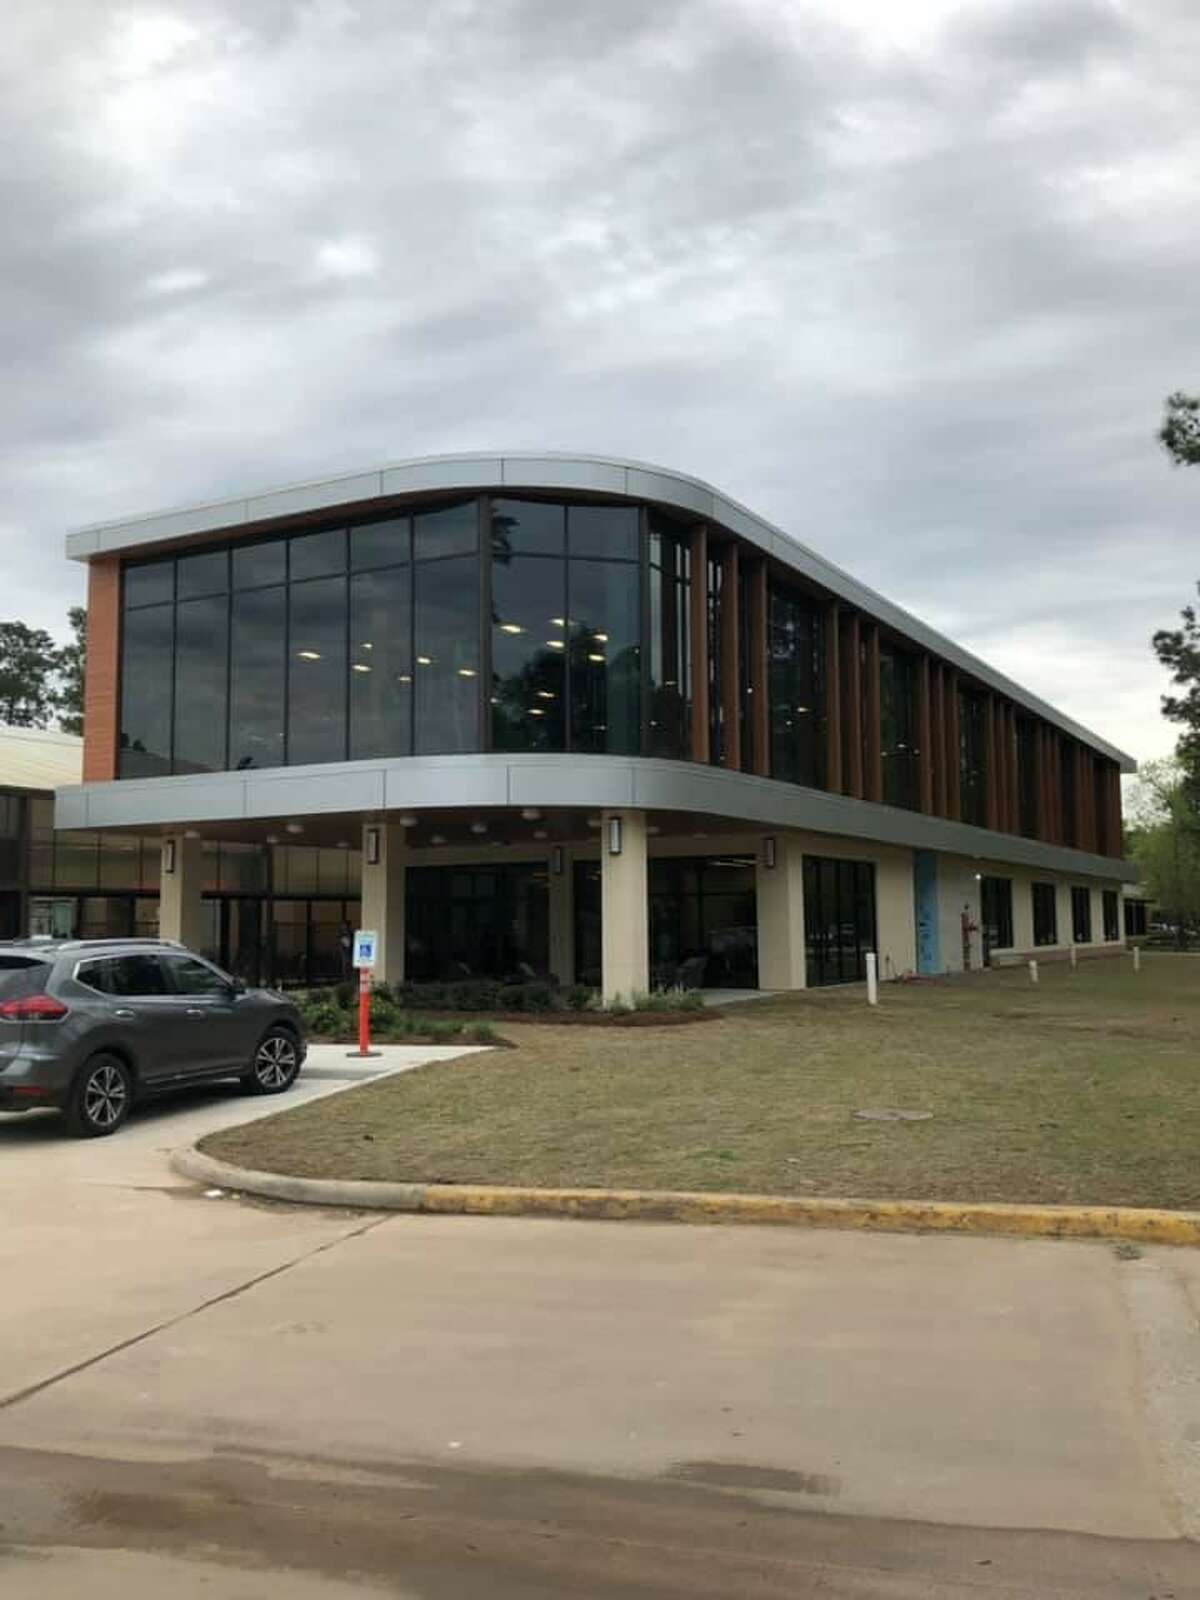 Lake Houston YMCA in Kingwood, after 18 months of repairs, reopened on March 16, 2019.